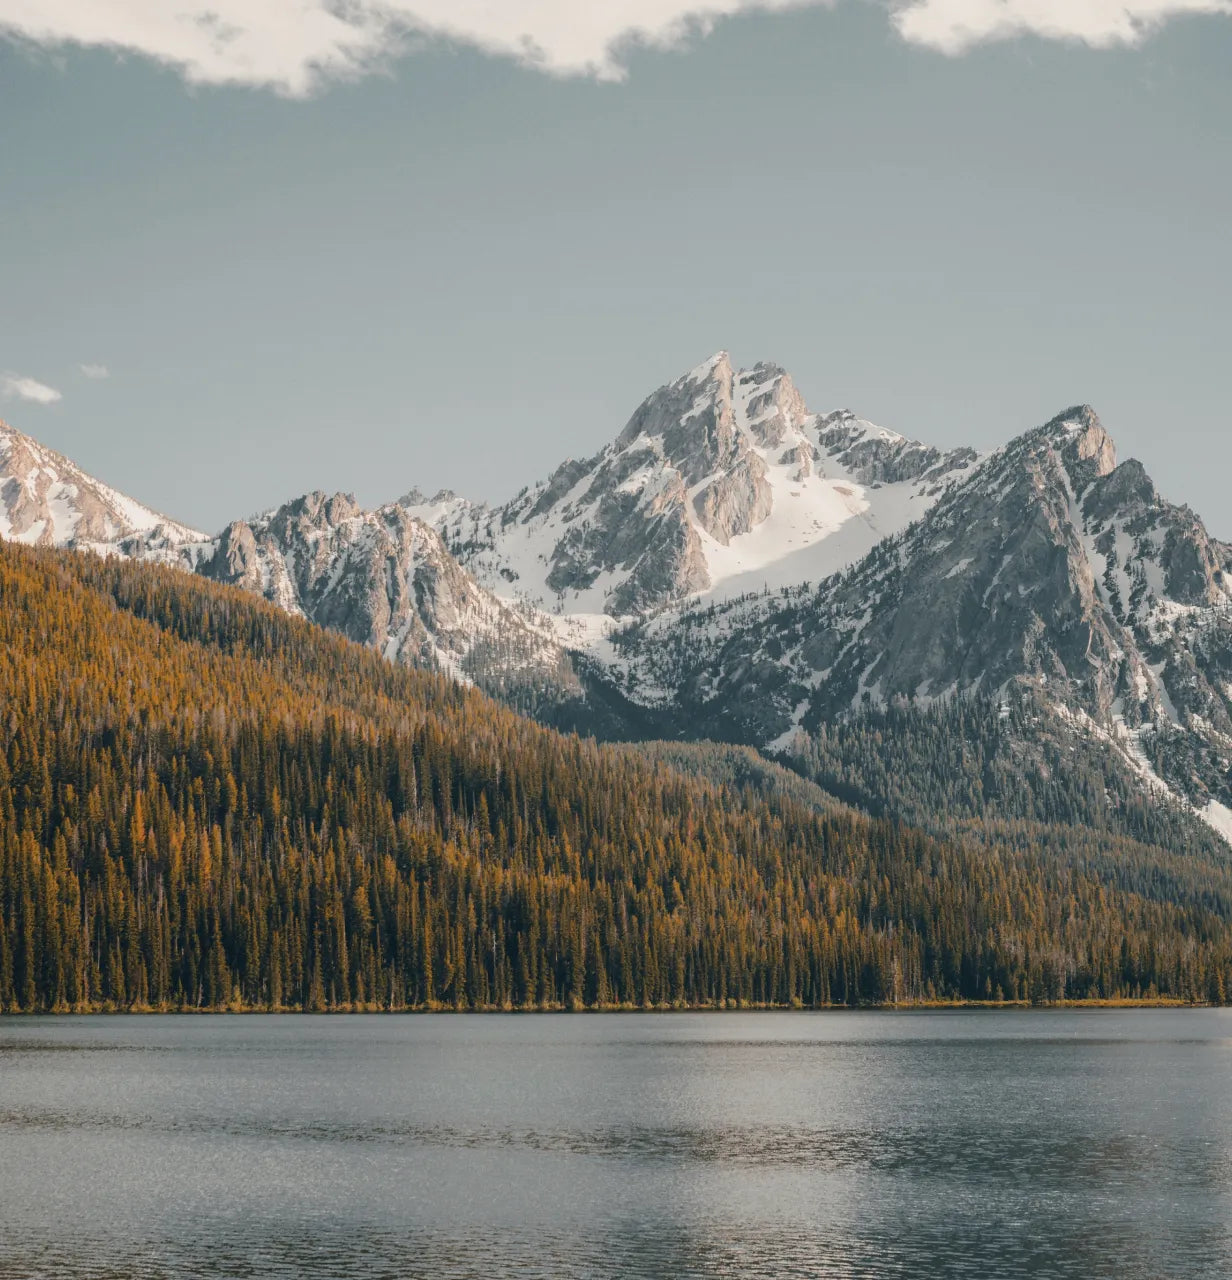 A serene landscape of a forested lake with snowy mountains in the background.